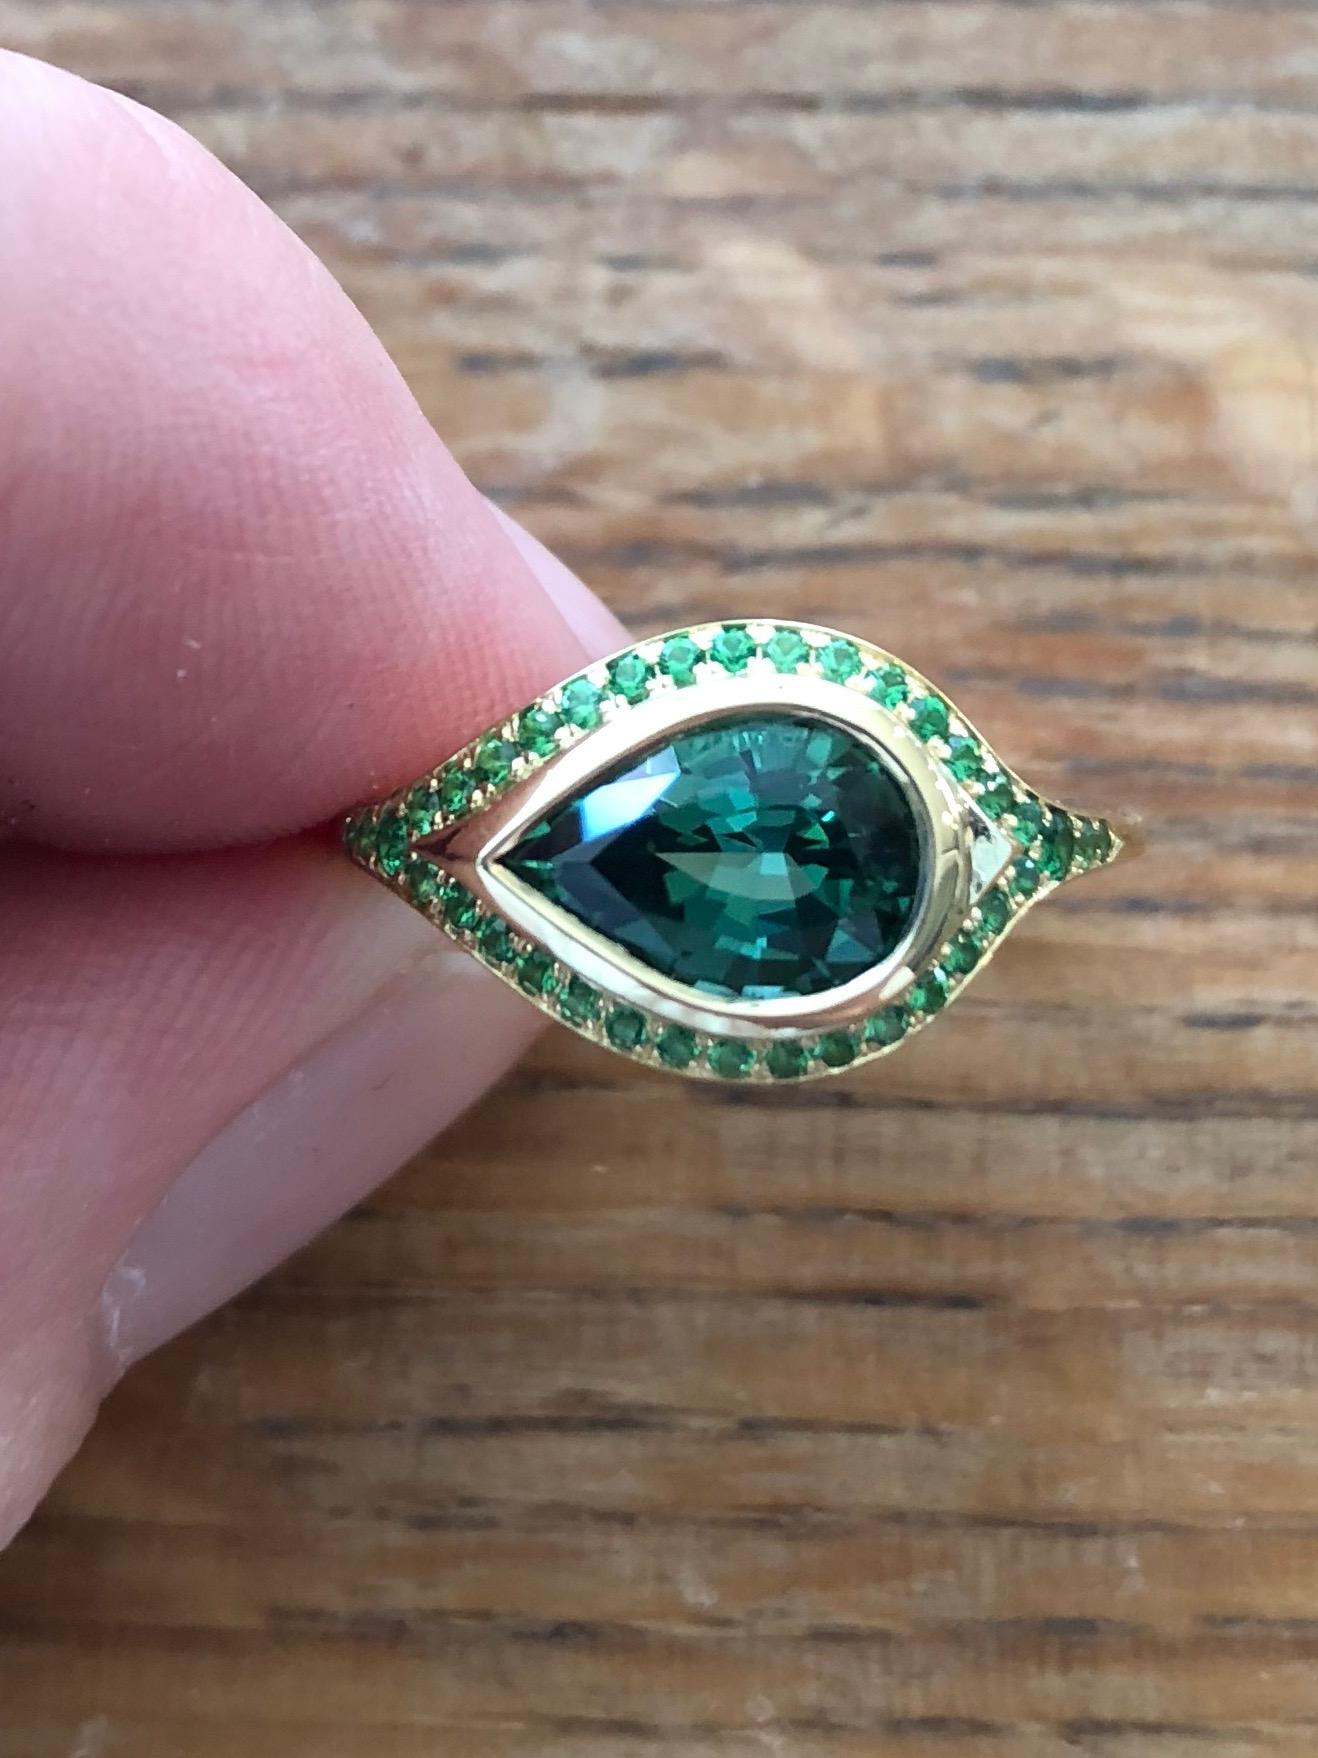 An exceptional blue green tourmaline 2.46 ct (10.6x 7.3 x5.5mm) mine to market from Namibia, encircled with the finest tsavorites creates a ring absolutely luminous with color. One of a kind. A combination of old world techniques that only a hand